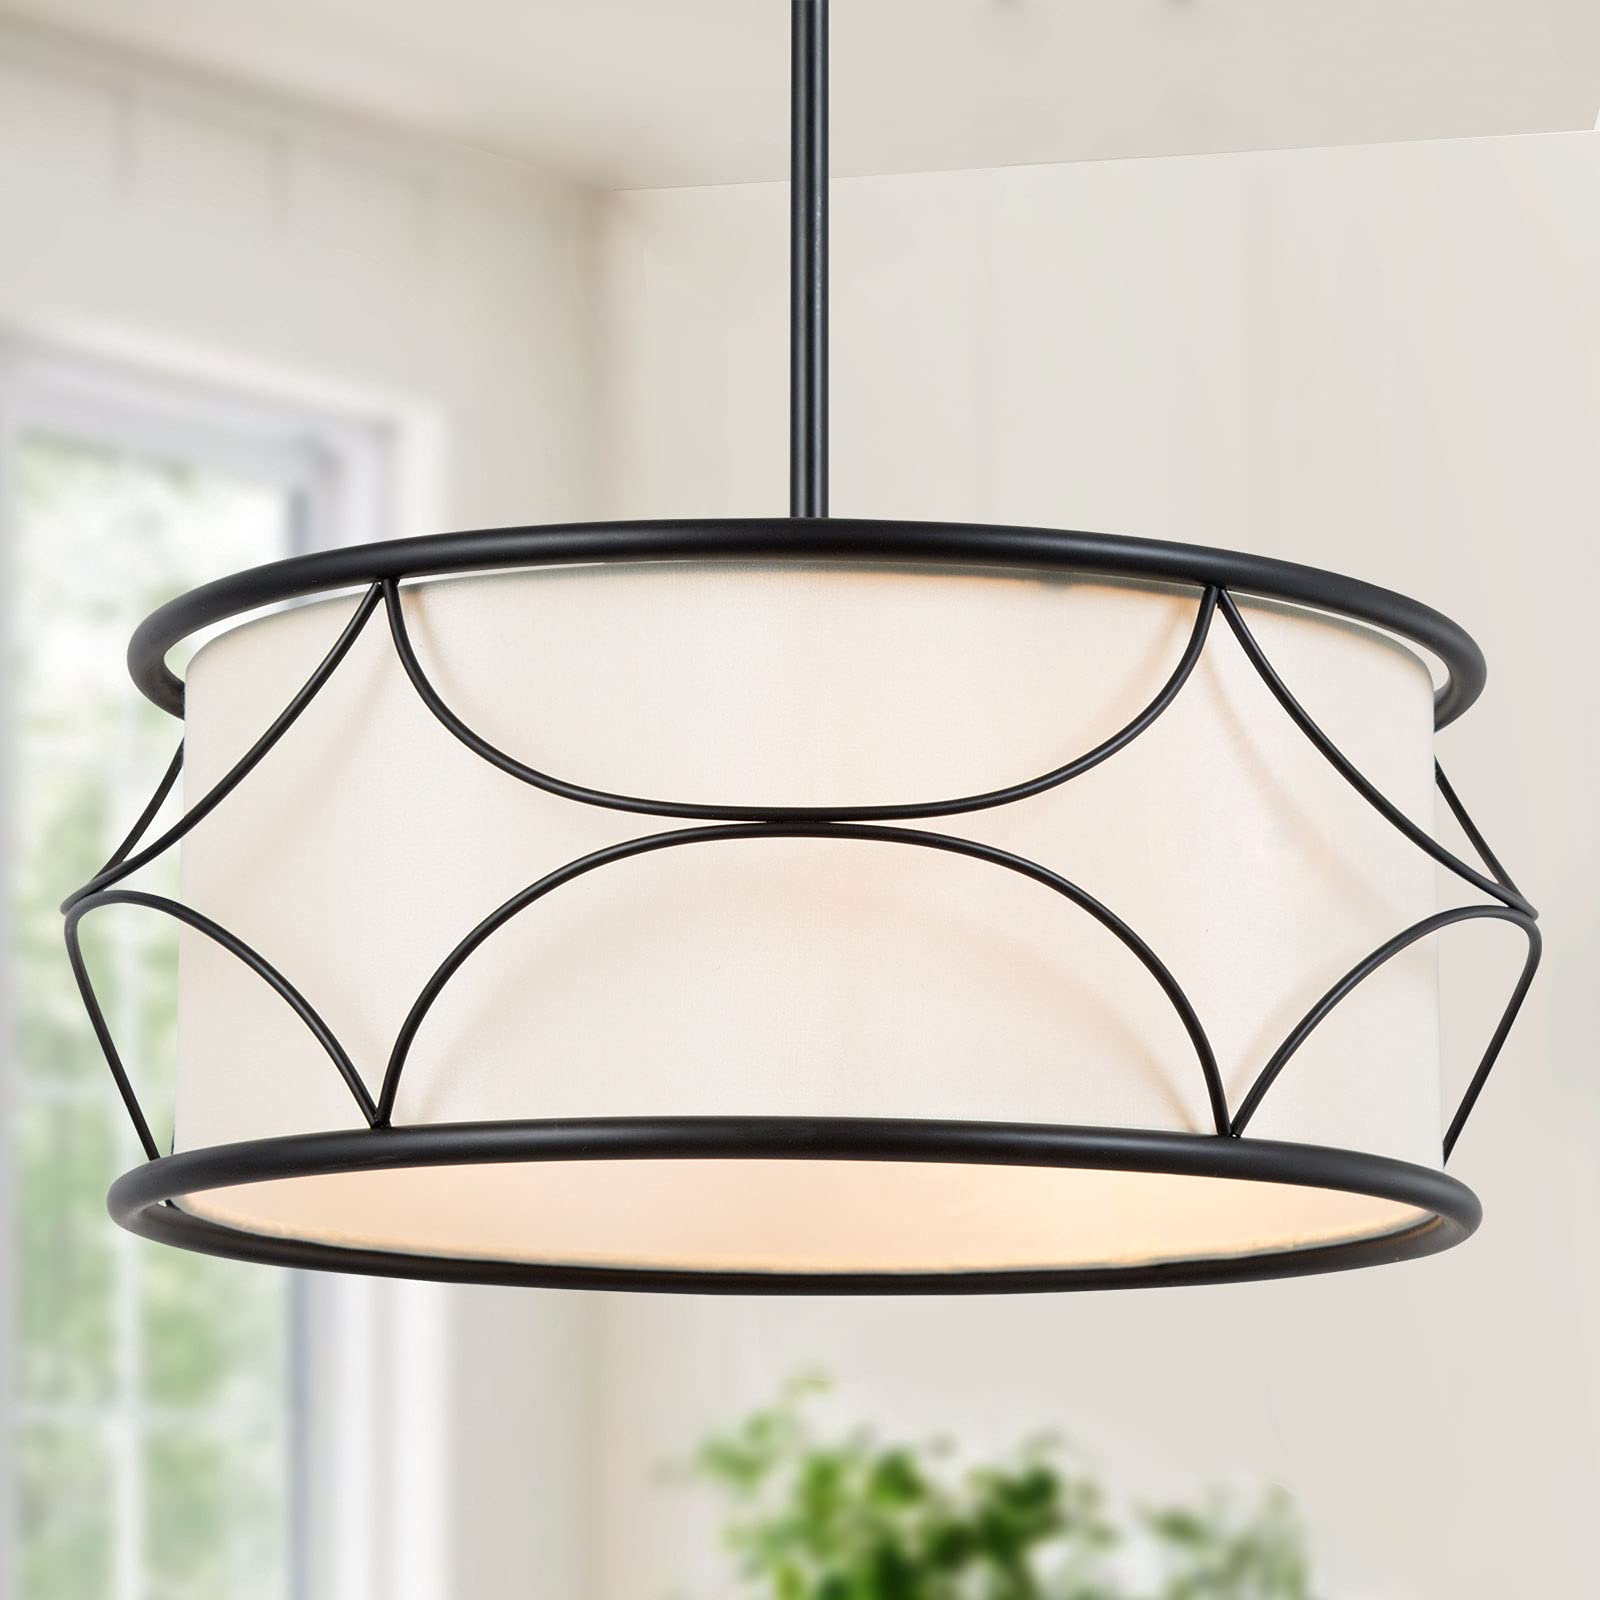 Savonnerie Modern Drum Lighting chandelier, Dining Room chandeliers, 3-Light Pendant Light Fixtures with Fabric Shade for Kitchen Island, 1